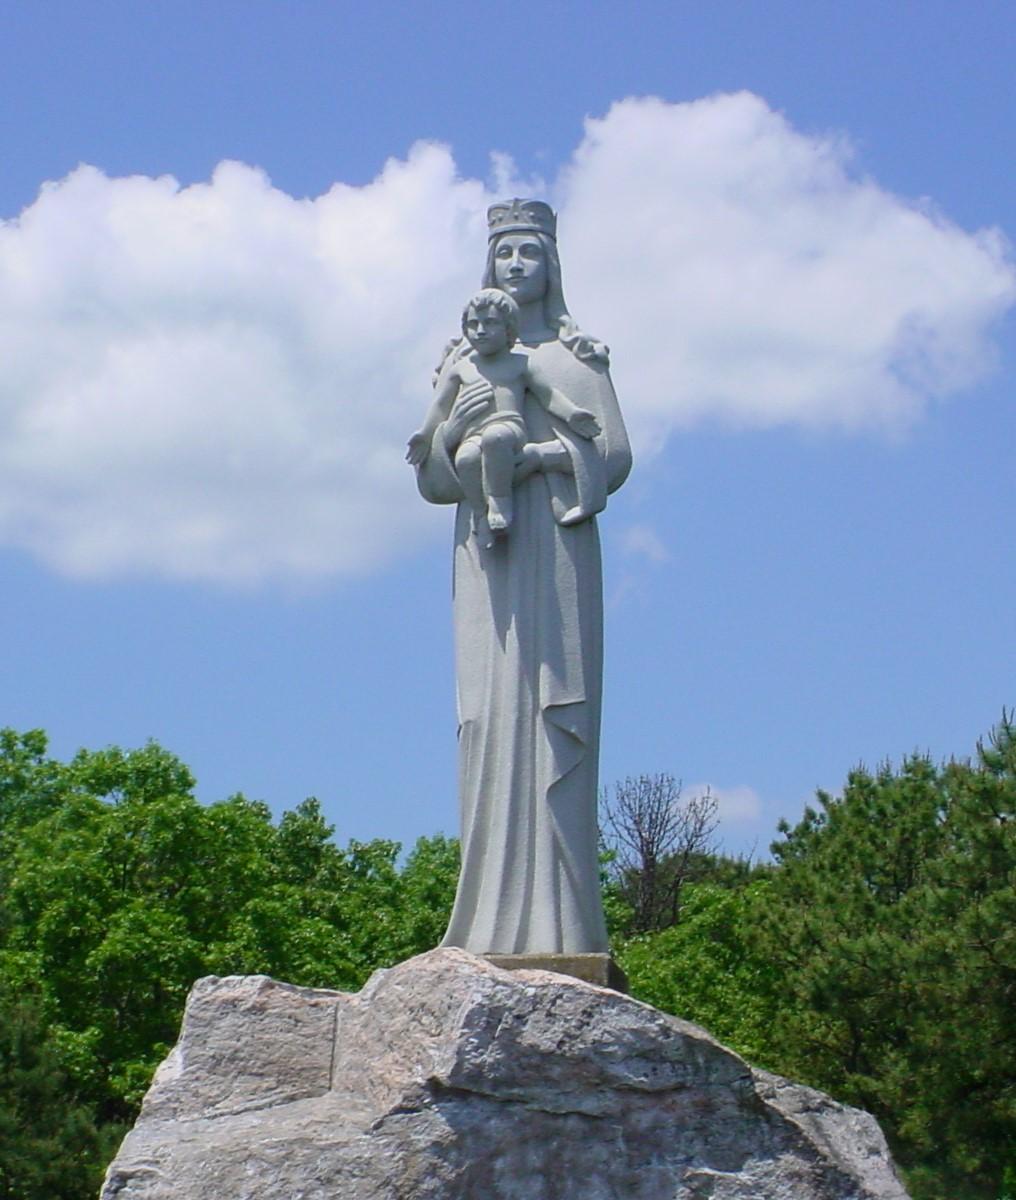 New York State Council Knights of Columbus You are cordially invited To attend the annual pilgrimage to The Shrine of Our Lady of The Island Sunday, May 19, 2019 10:00 AM Rosary 11:30 AM Mass The